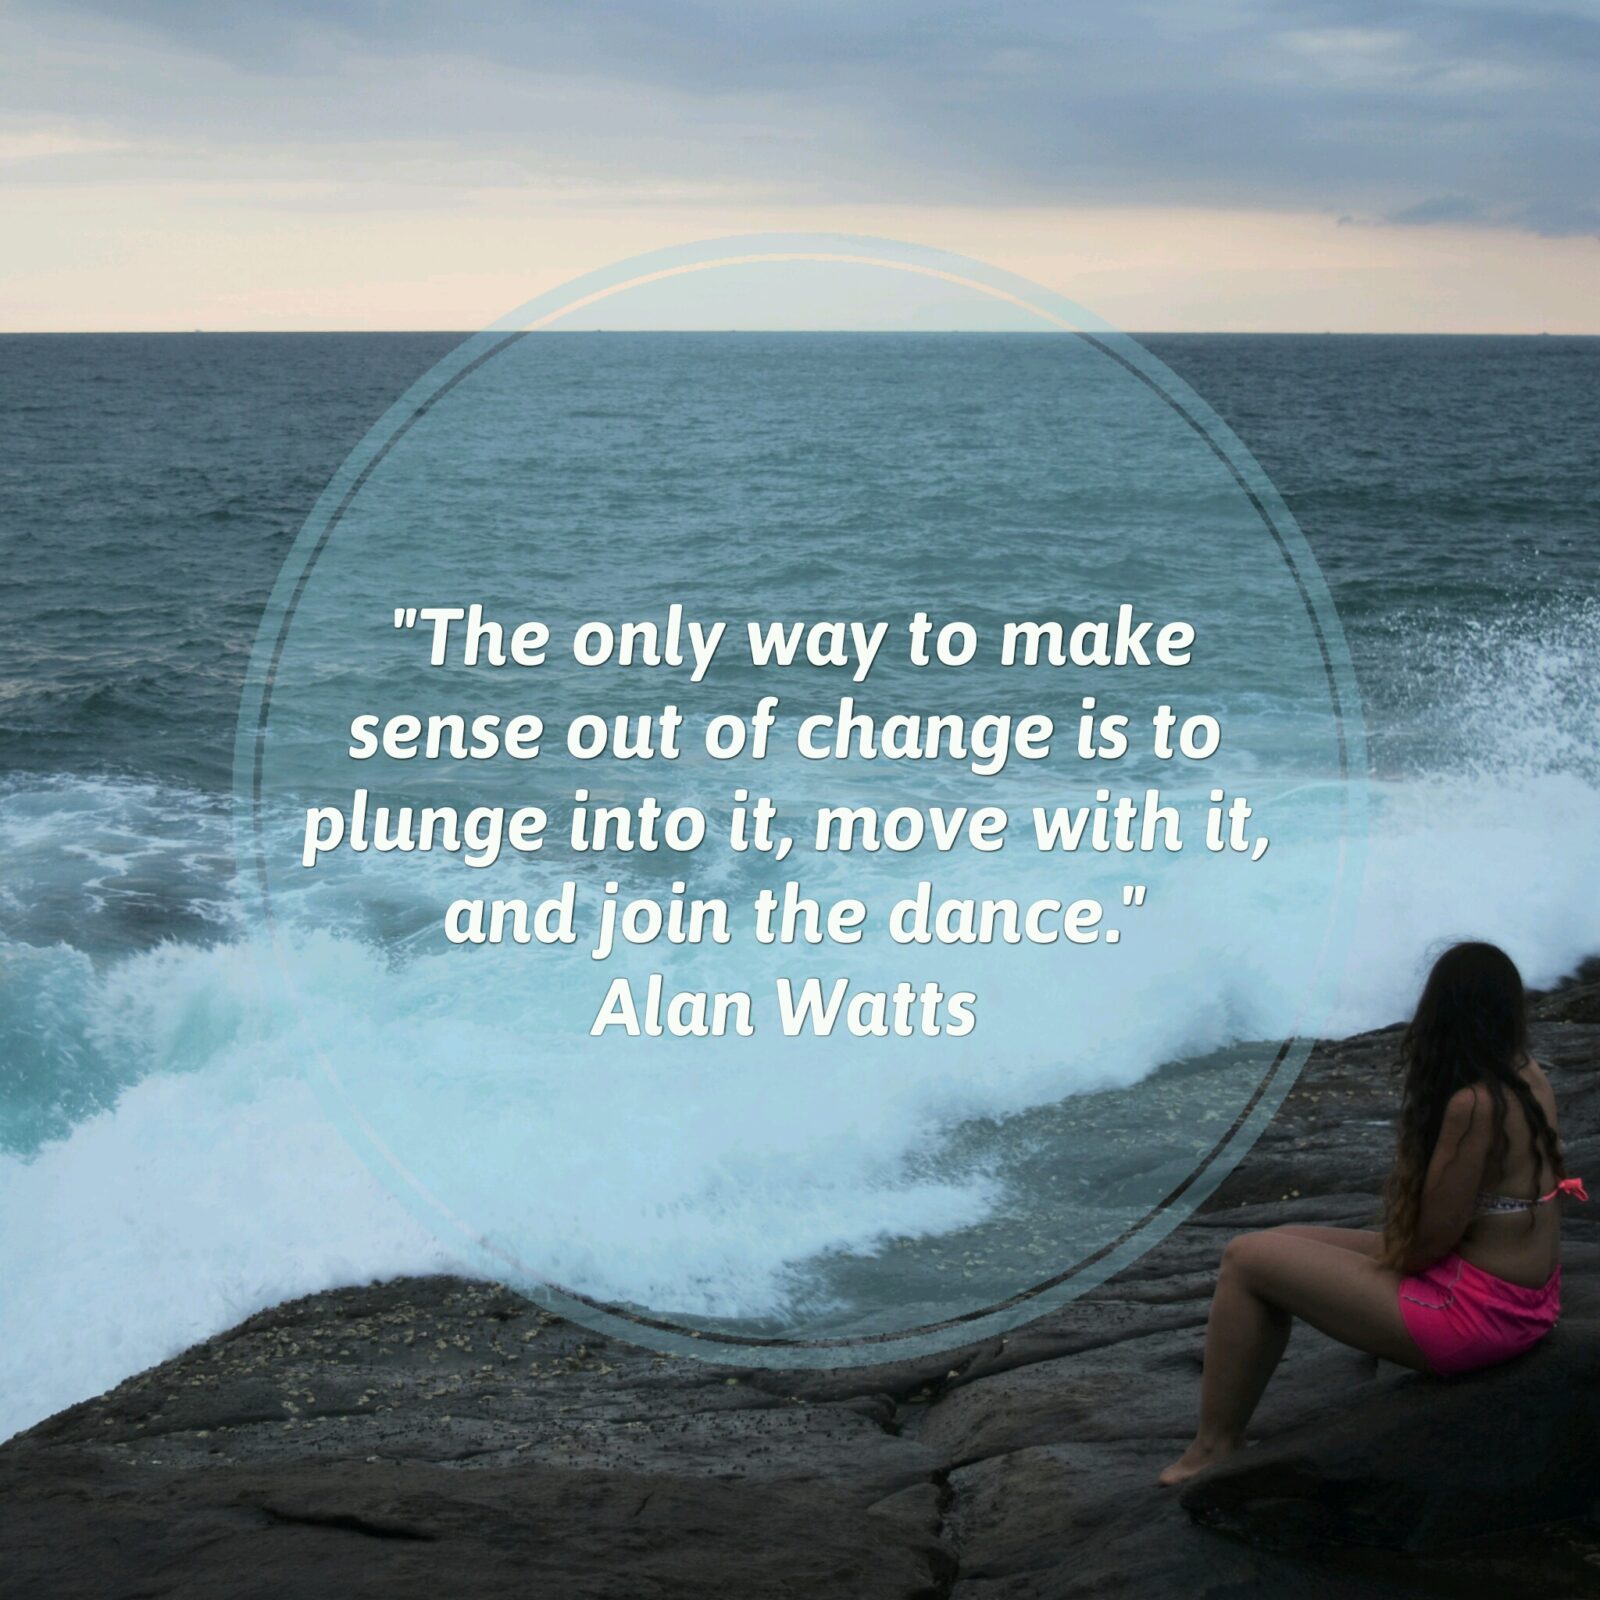 "The only way to make sense out of change is to plunge into it, move with it, and join the dance." - Alan Watts